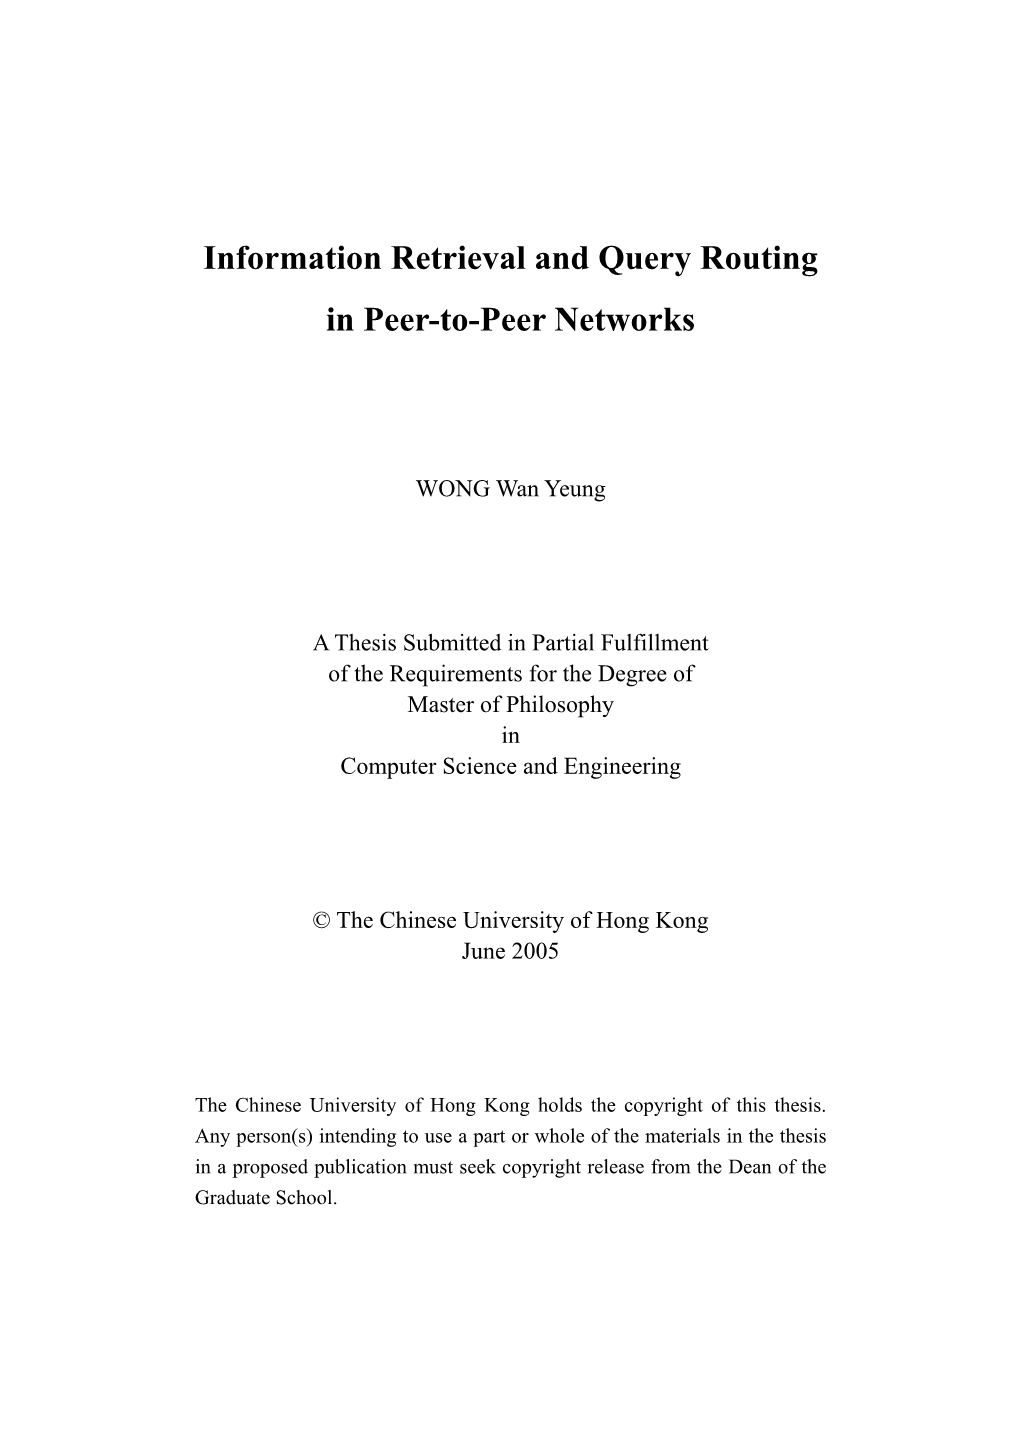 Information Retrieval and Query Routing in Peer-To-Peer Networks